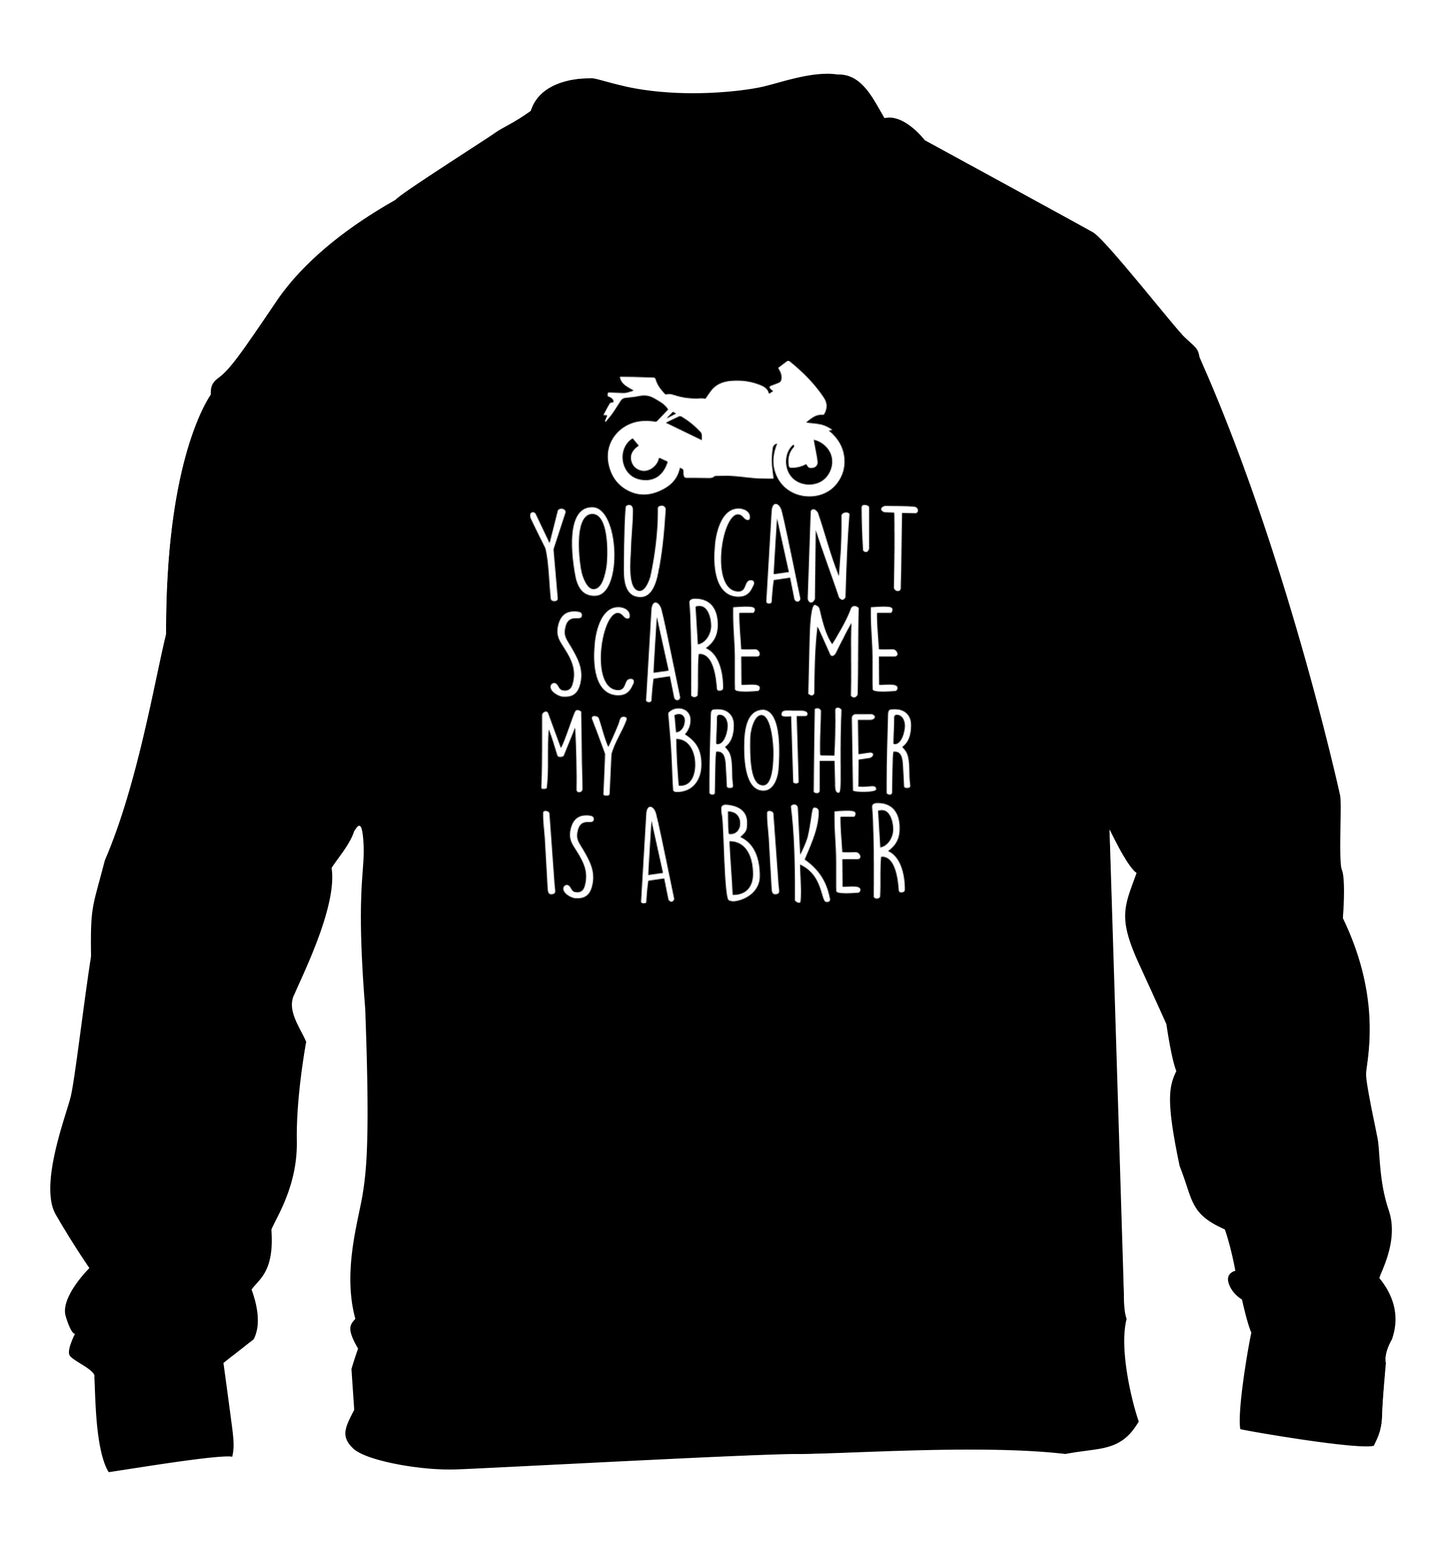 You can't scare me my brother is a biker children's black sweater 12-13 Years